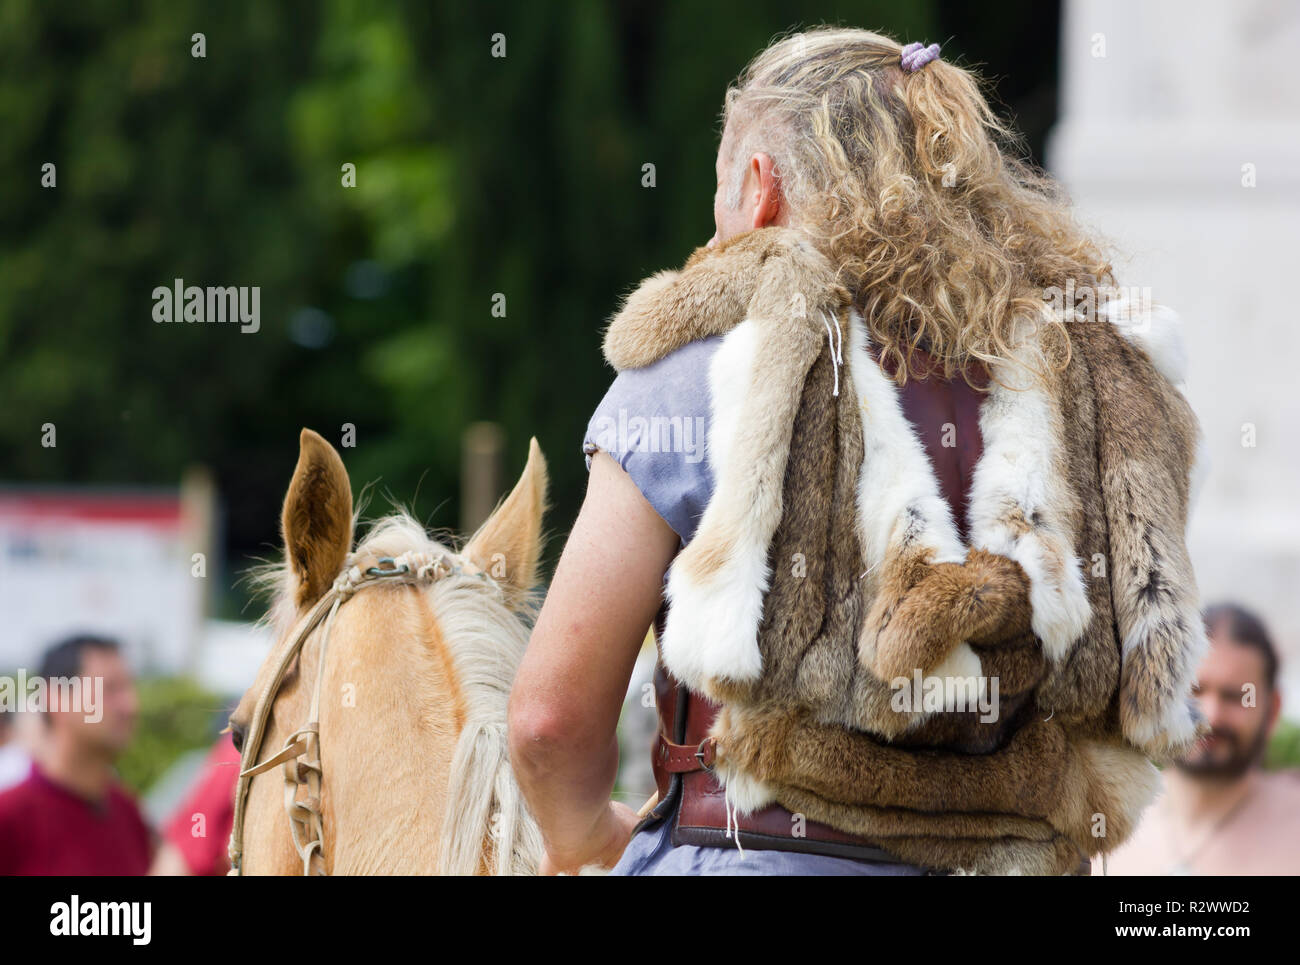 AQUILEIA, Italy - June 22, 2014: Ancient celtic warrior during the local annual ancient roman historical reenactment Stock Photo